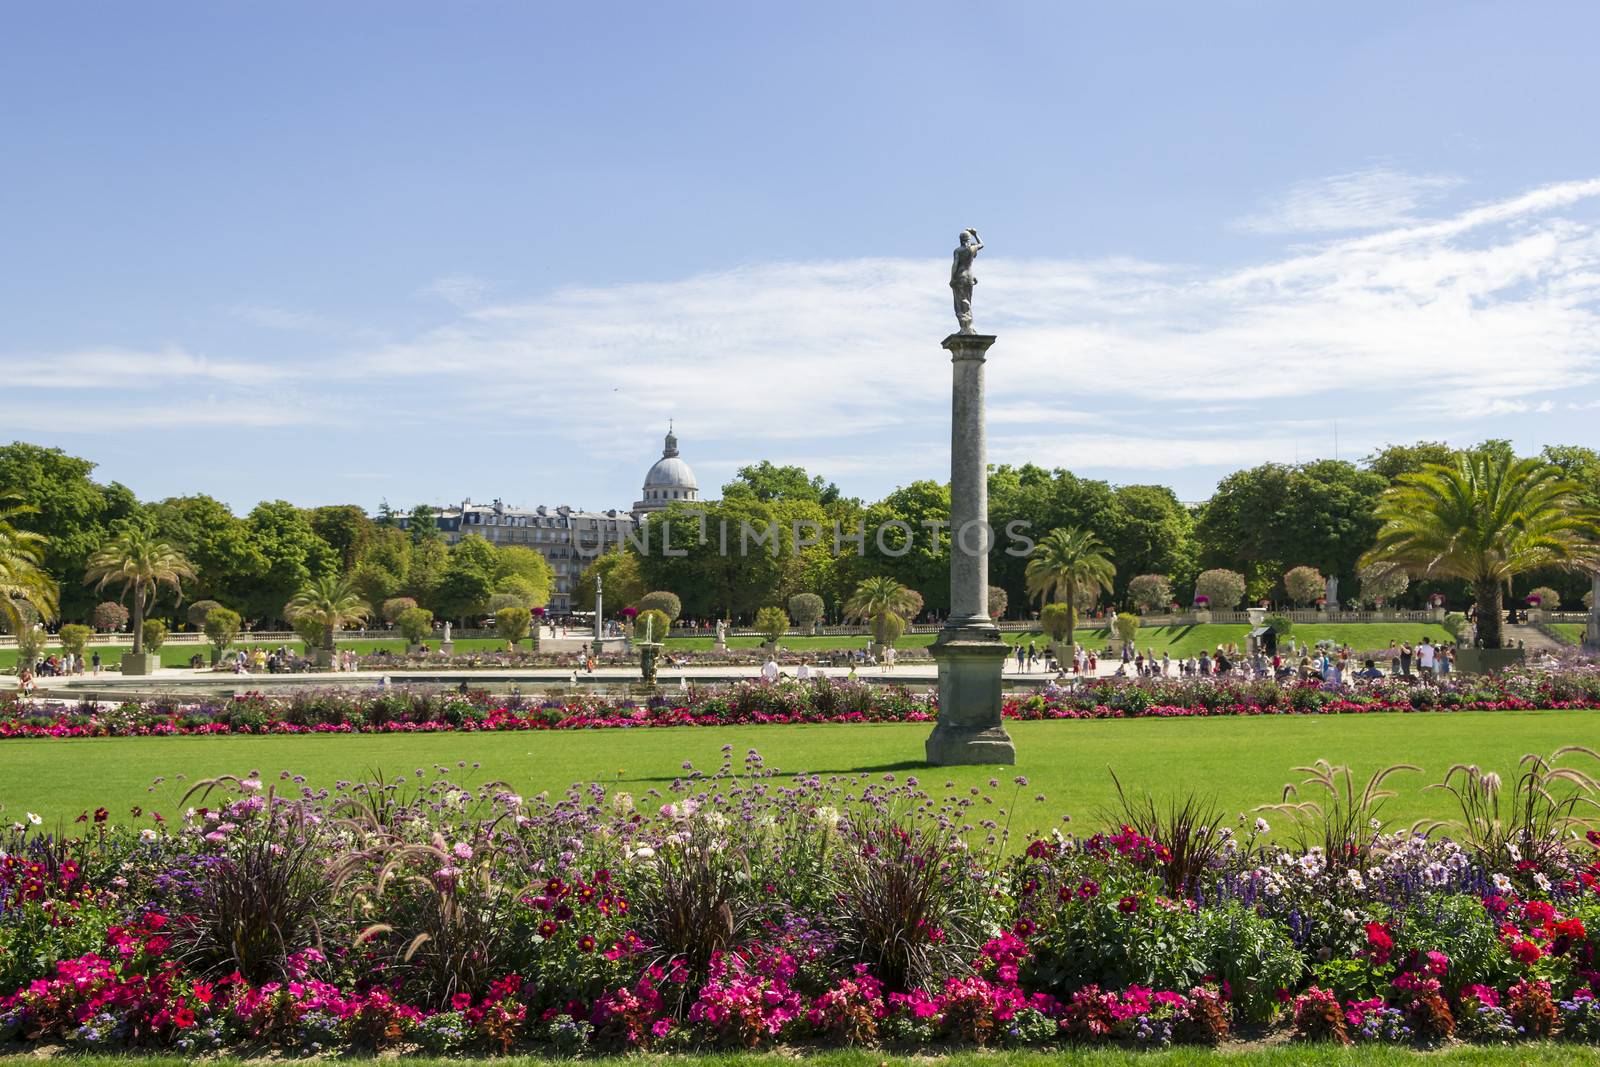 Luxembourg gardens, Paris, France by Tetyana